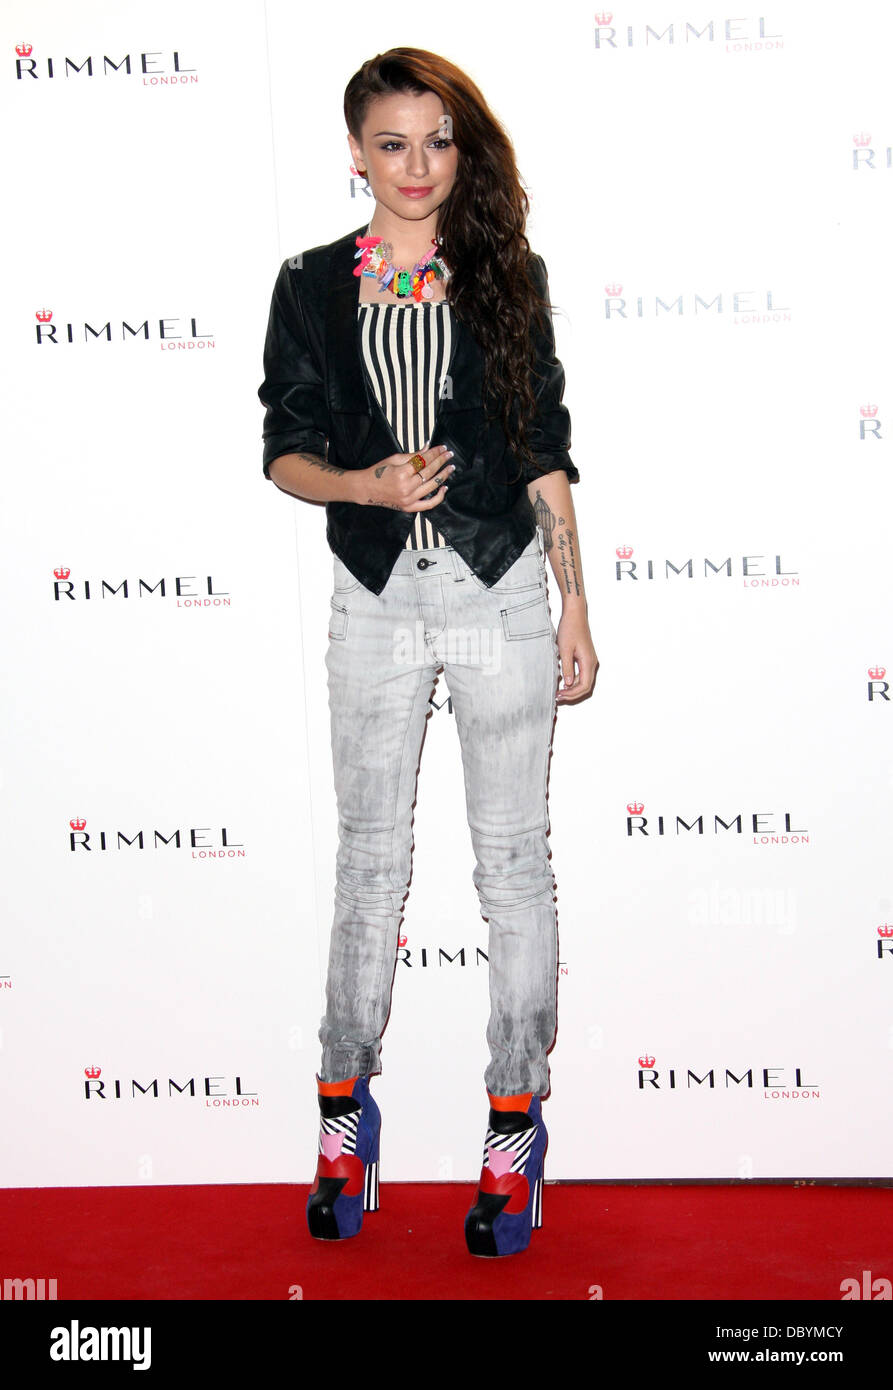 Cher Lloyd Rimmel London party held at Battersea Power Station London, England - 15.09.11 Stock Photo